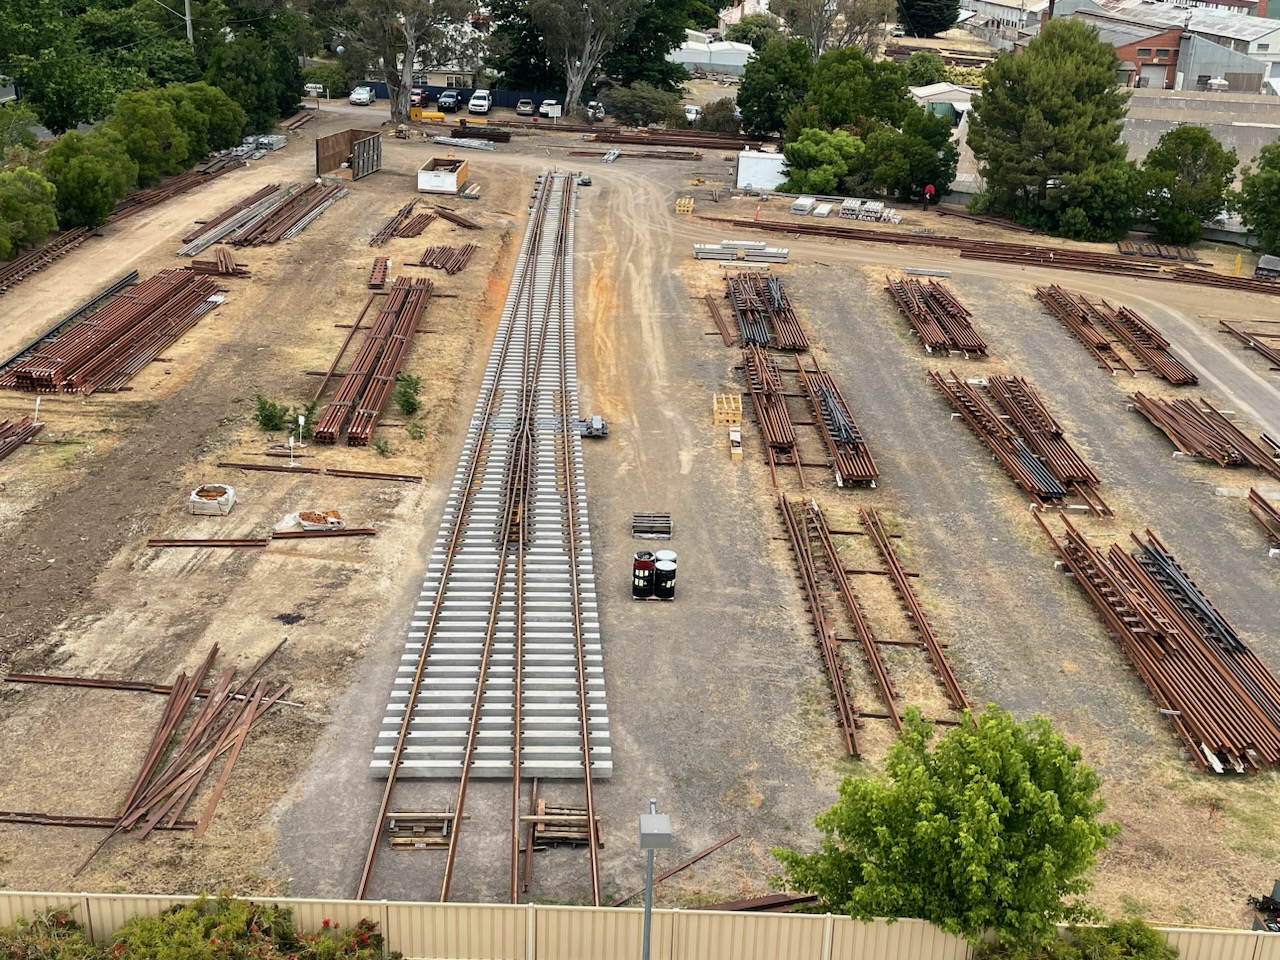 Inland Rail supplier Vossloh Cogifer Australia assembled and tested the 1:18.5 Standard Gauge Swing Nose Crossing (SNX) turnout design required for the Daroobalgie crossing loop on the Stockinbingal to Parkes section of the project.